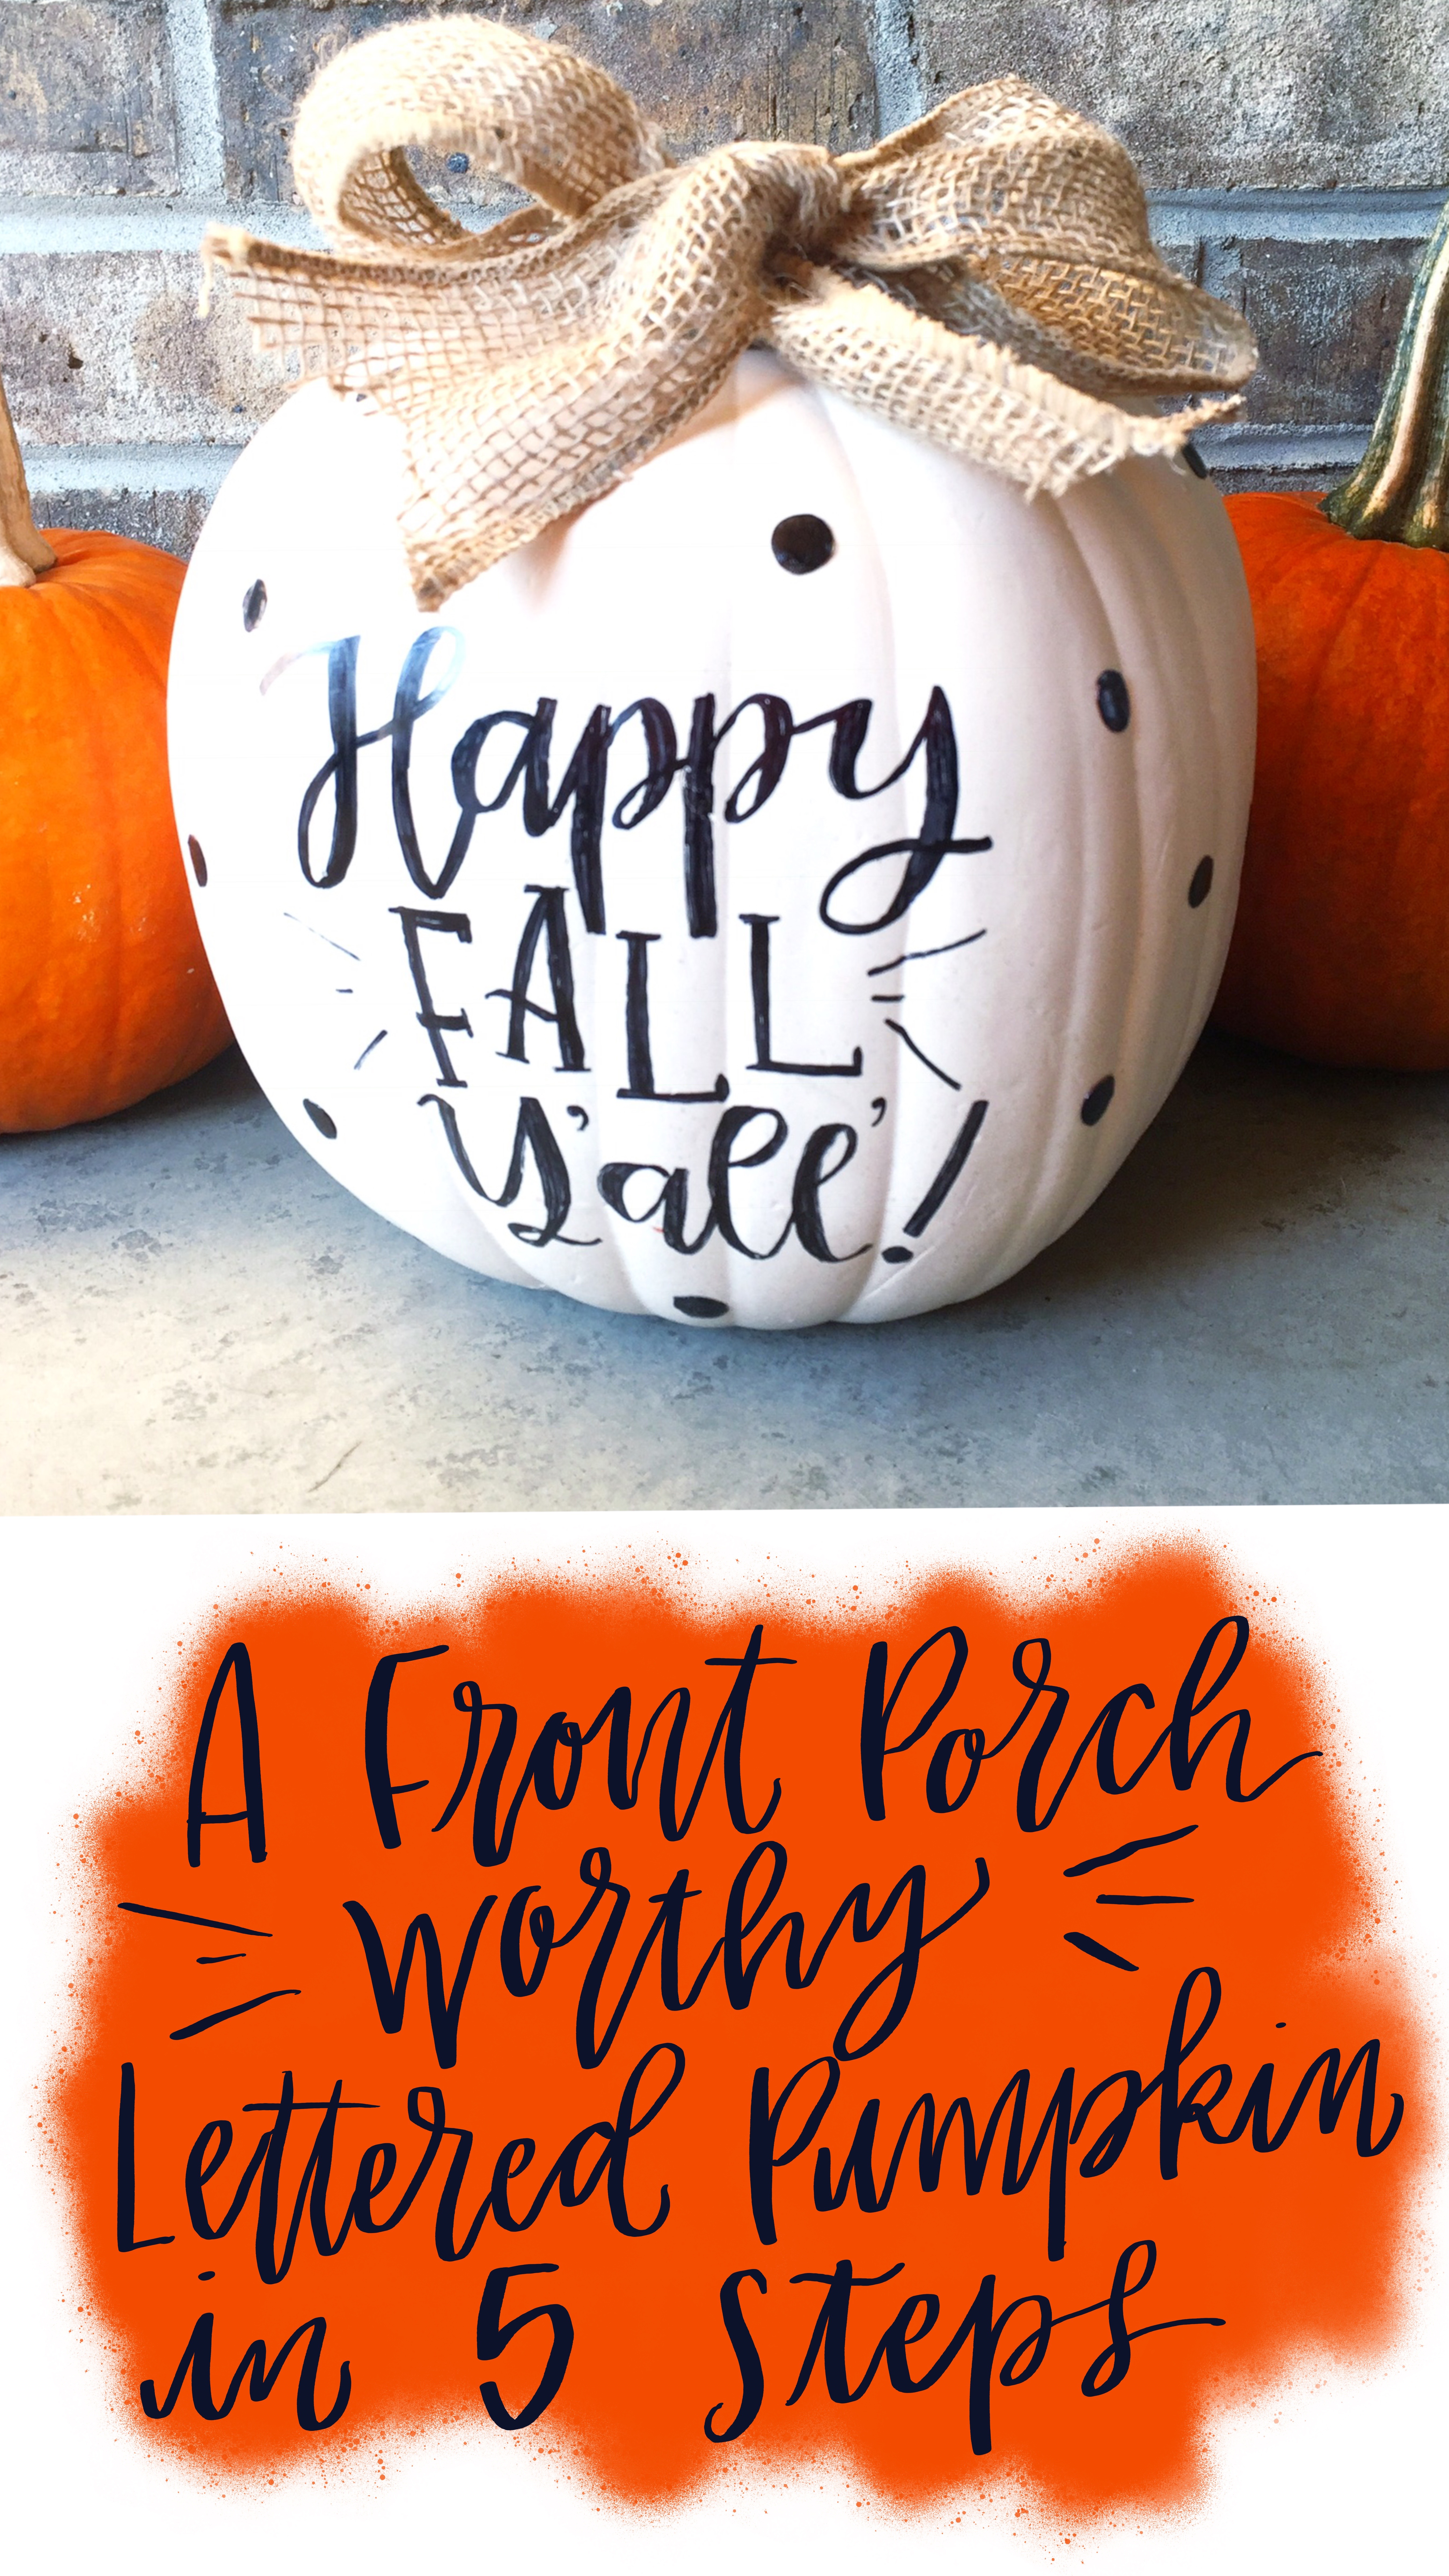 Lauren Fitzmaurice of Renmade Calligraphy shows you how to create a handlettered pumpkin that is covered in foil polkadots and burlap bow in this quick and easy 5 step tutorial using Tombow USA supplies. For more tips and tricks with letterIng and crafting goodness at renmadecalligraphy.com.